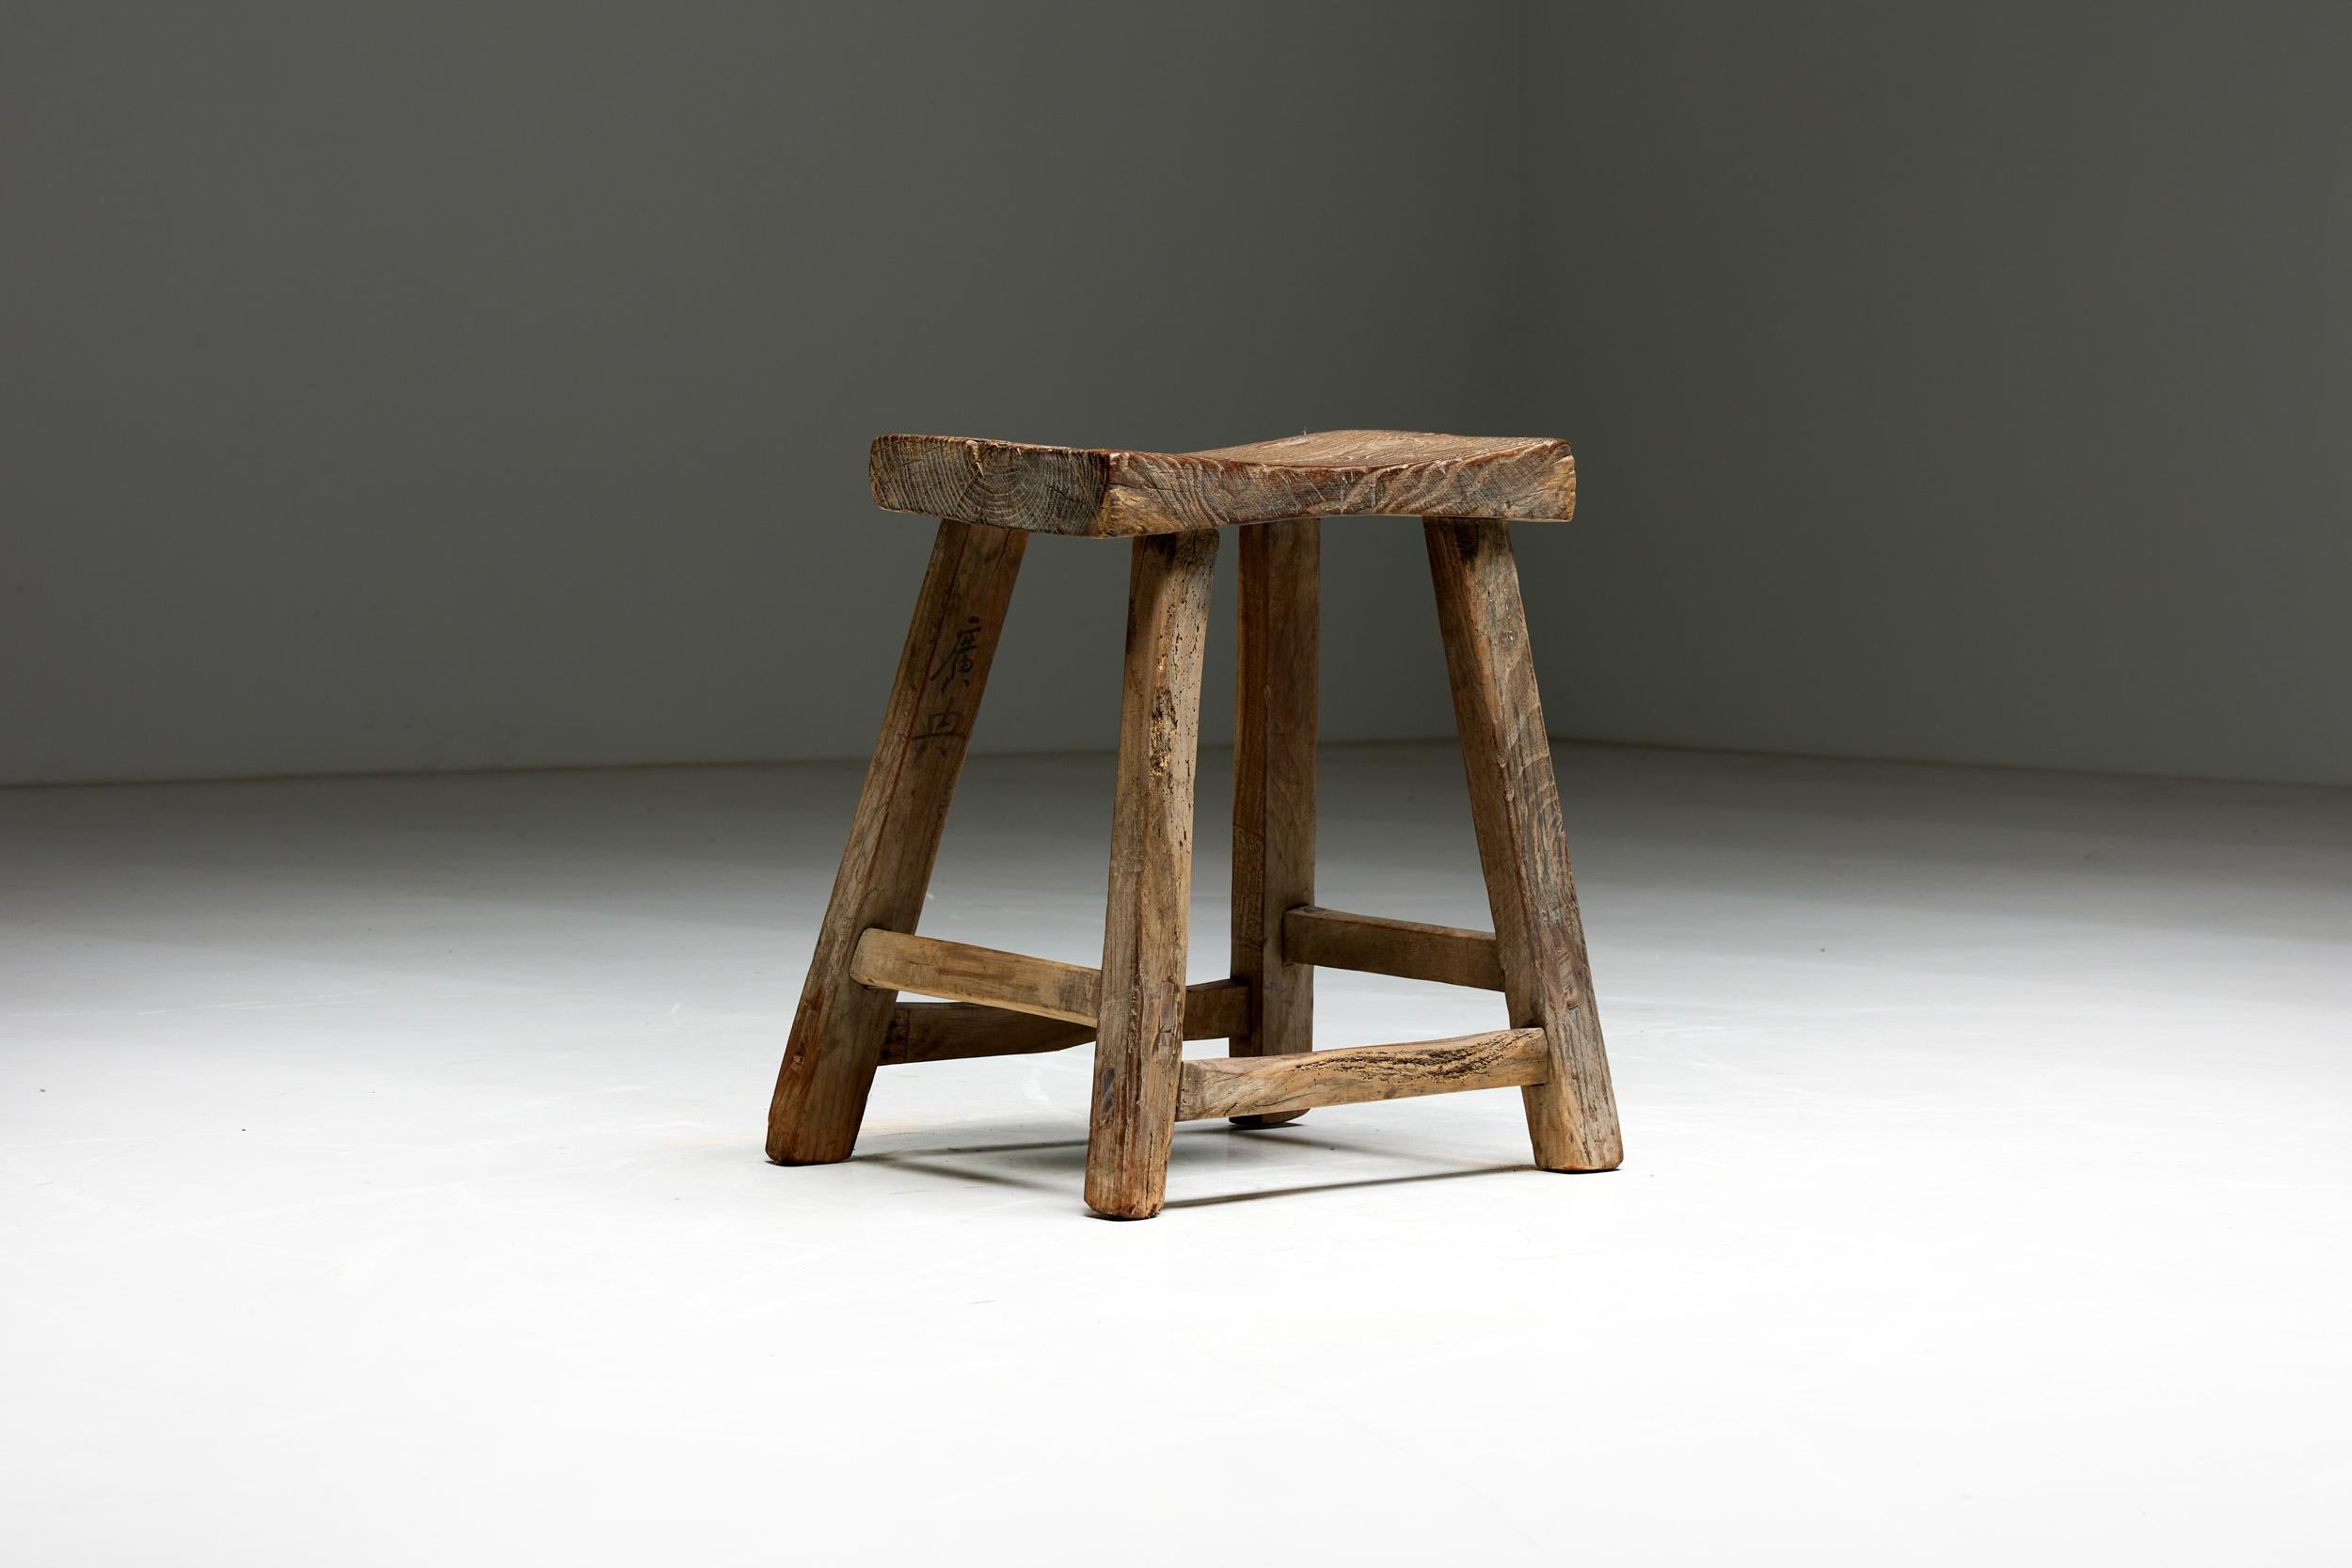 Rustic Travail Populaire Stool, France, Early 20th Century For Sale 1